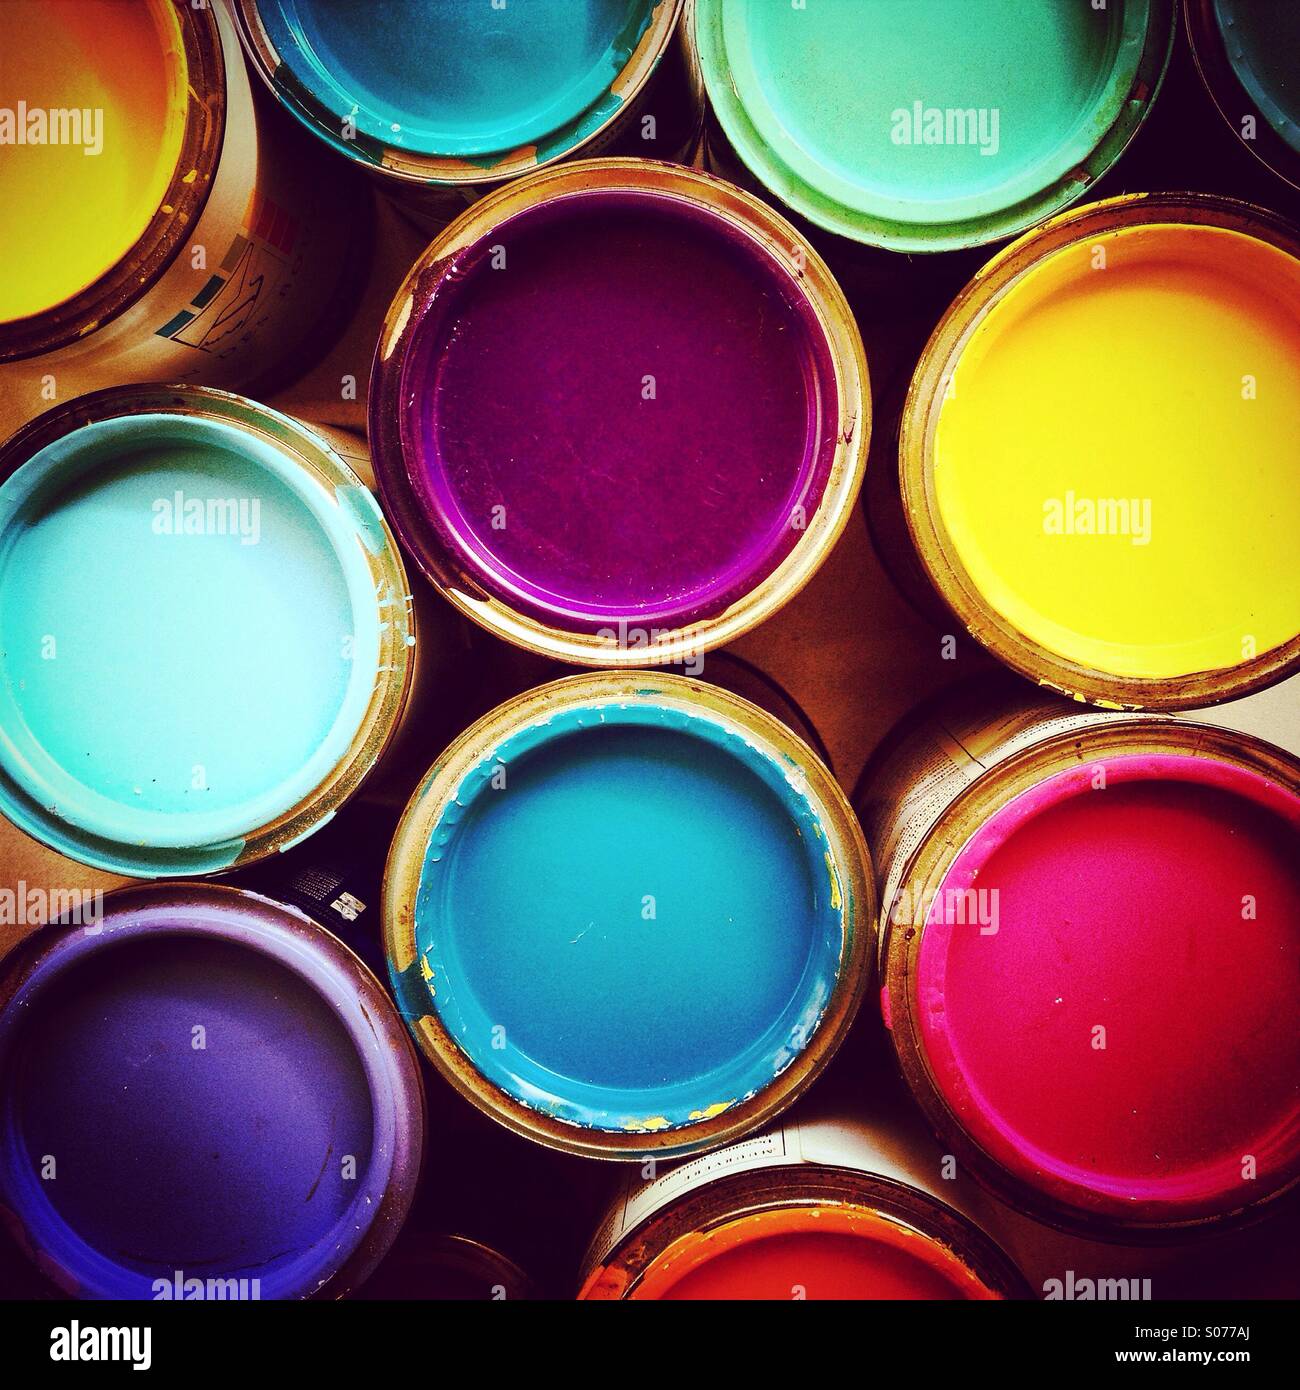 Paint pots, viewed from above Stock Photo